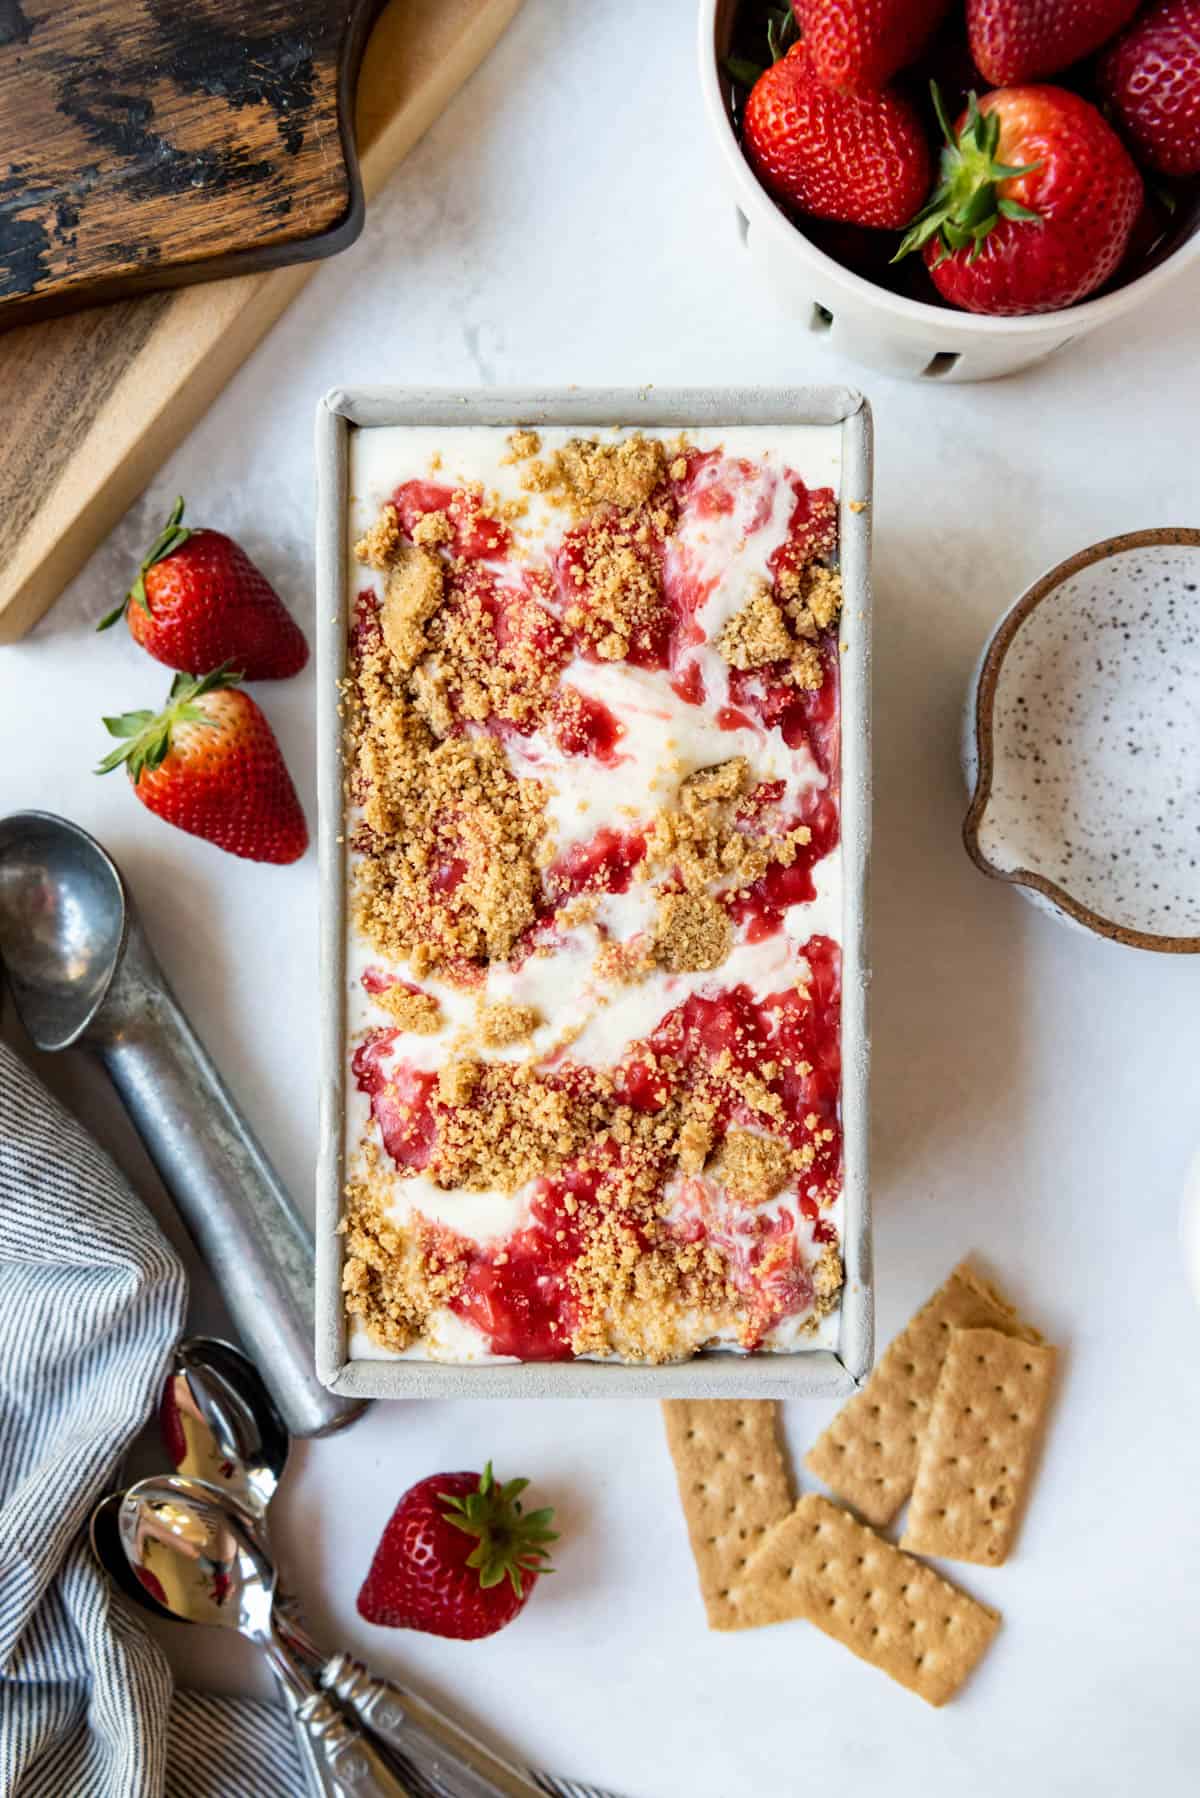 Top view of a metal pan filled with ice cream, strawberry sauce, and graham cracker crumbs.